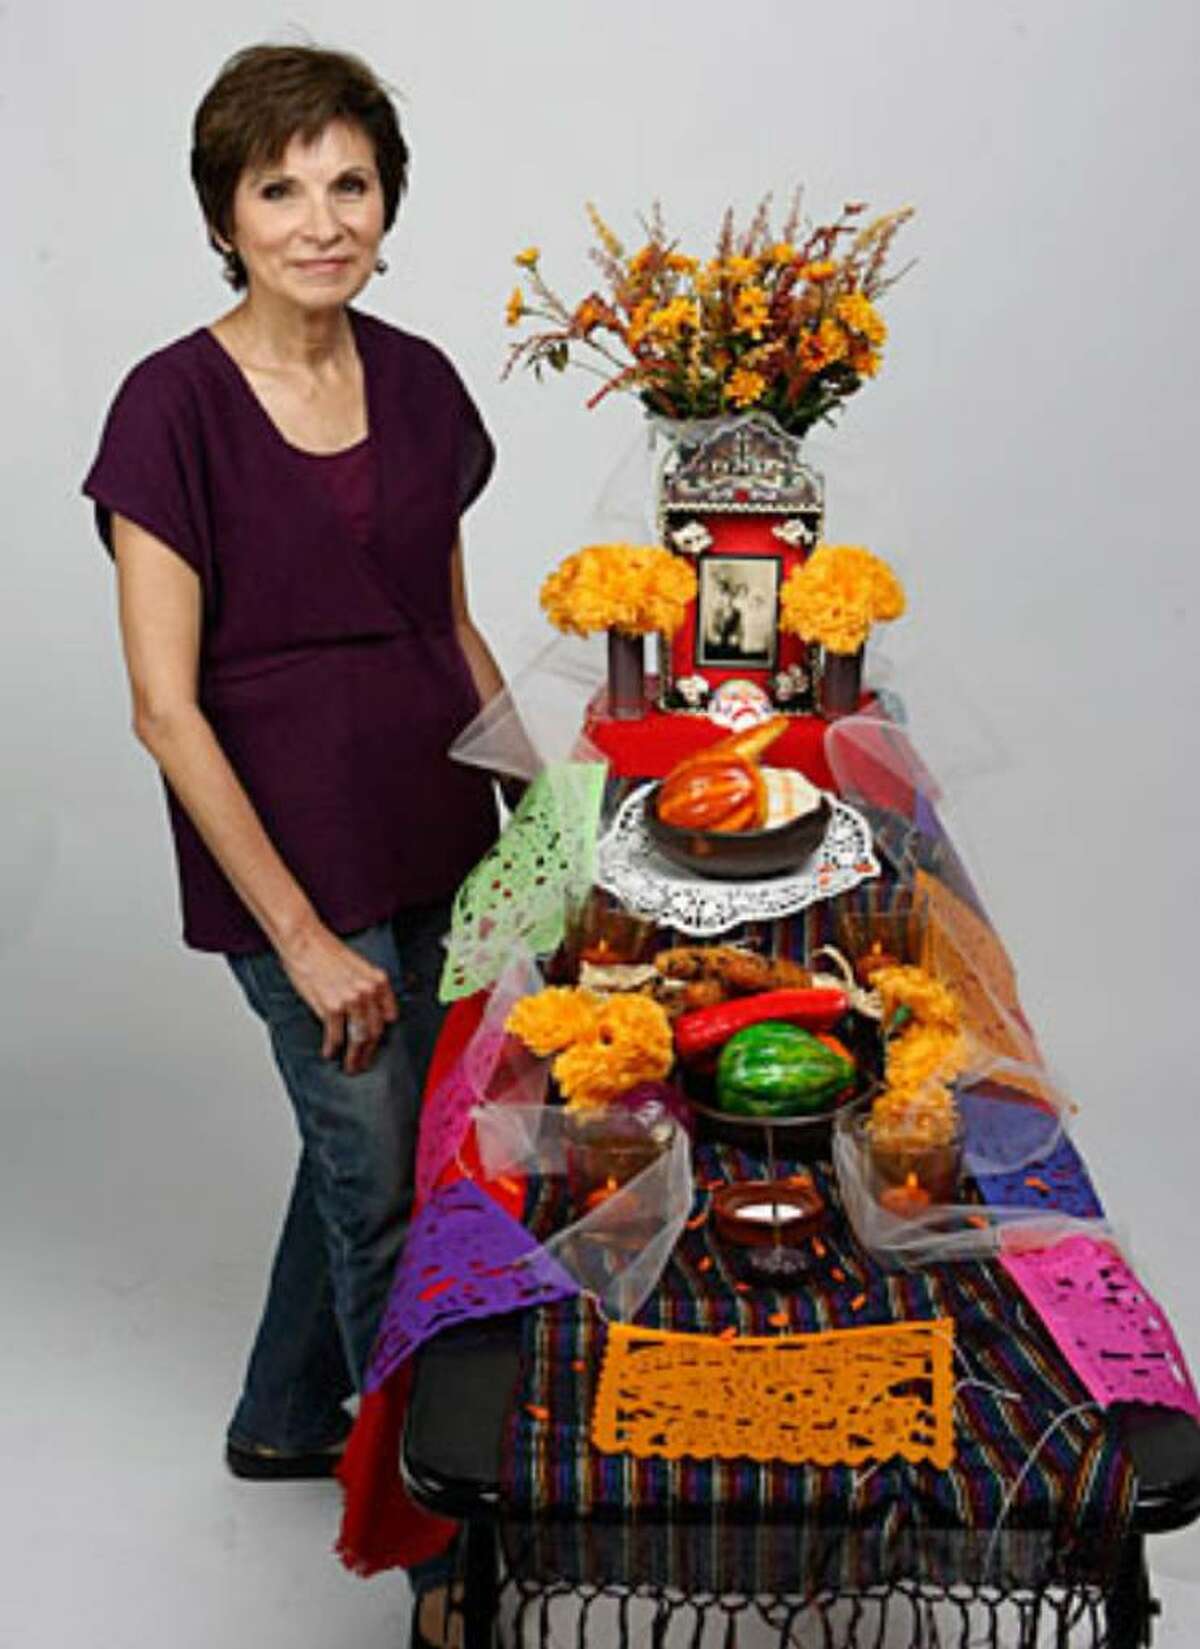 Building an altar for Día de los Muertos doesn't have to be a time-consuming or expensive project. "The purpose of the altar is remembrance," said San Antonio native Thelma Muraida, who has taught Día de los Muertos workshops at the Guadalupe Cultural Arts Center.